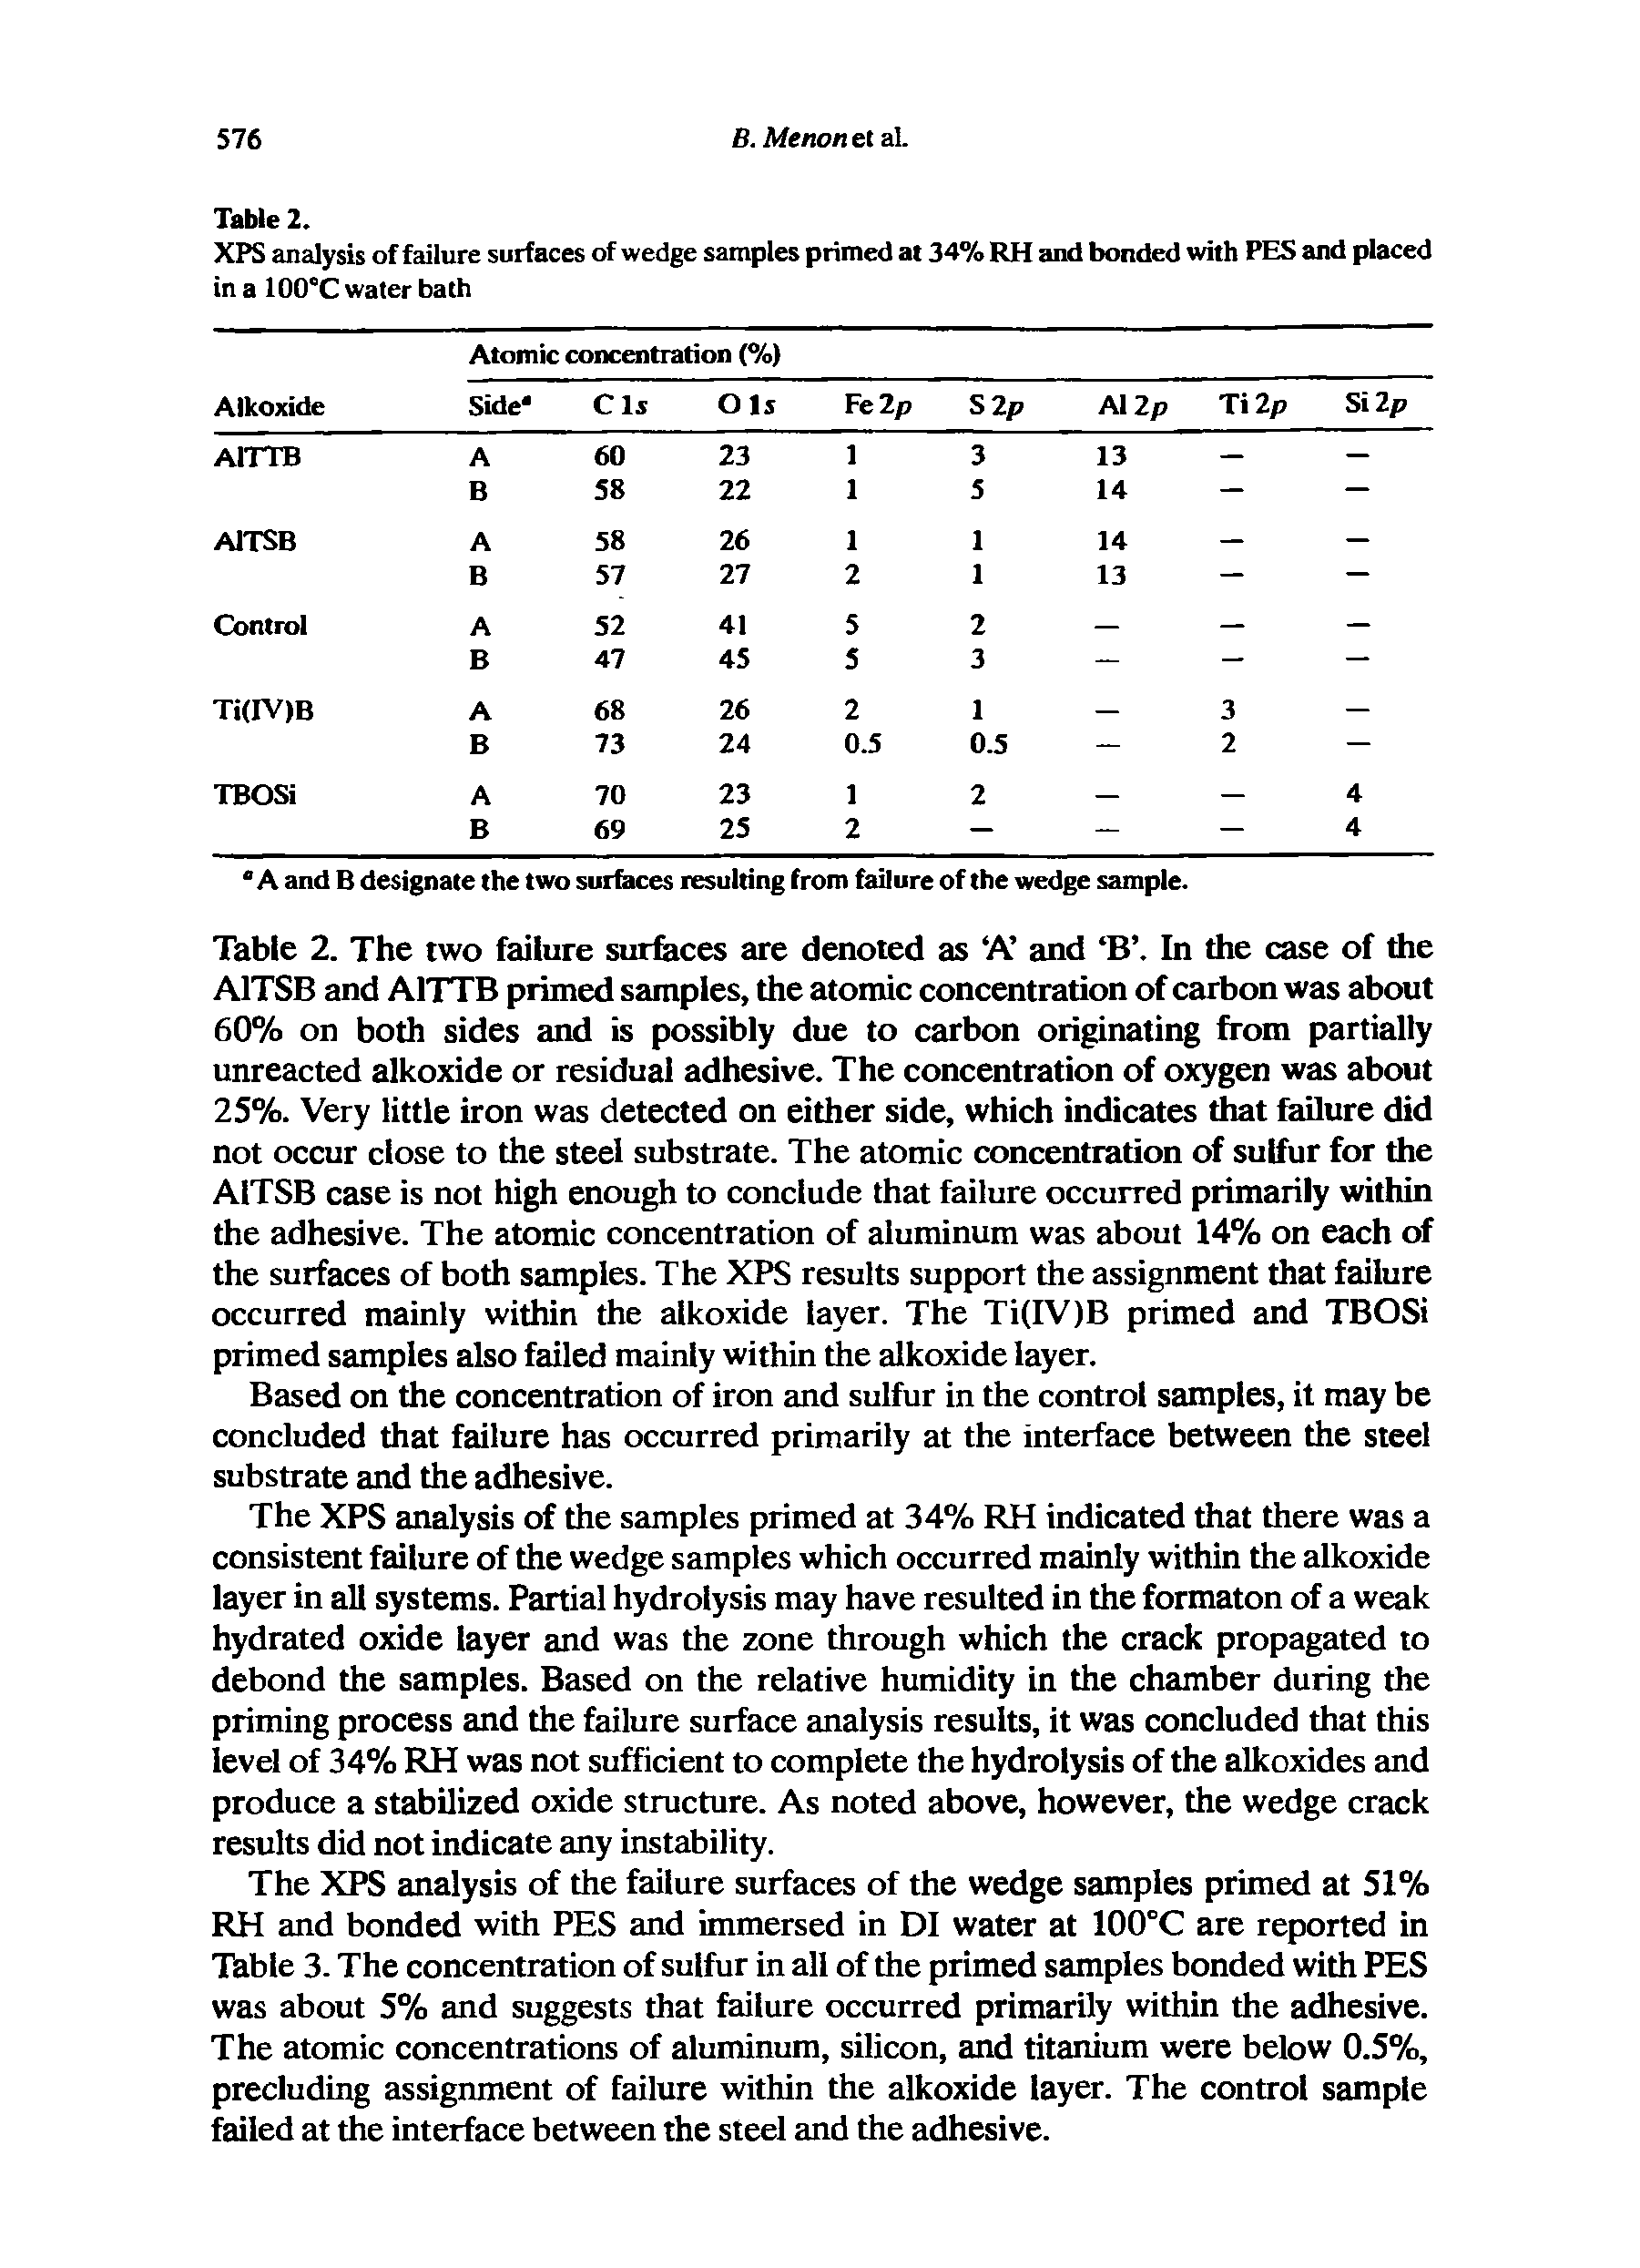 Table 2. The two failure surfaces are denoted as A and B In the case of the A1TSB and A1TTB pruned samples, the atomic concentration of carbon was about 60% on both sides and is possibly due to carbon originating from partially unreacted alkoxide or residual adhesive. The concentration of oxygen was about 25%. Very little iron was detected on either side, which indicates that Mure did not occur close to the steel substrate. The atomic concentration of sulfur for the A1TSB case is not high enough to conclude that failure occurred primarily within the adhesive. The atomic concentration of aluminum was about 14% on each of the surfaces of both samples. The XPS results support the assignment that failure occurred mainly within the alkoxide layer. The Ti(IV)B primed and TBOSi primed samples also failed mainly within the alkoxide layer.